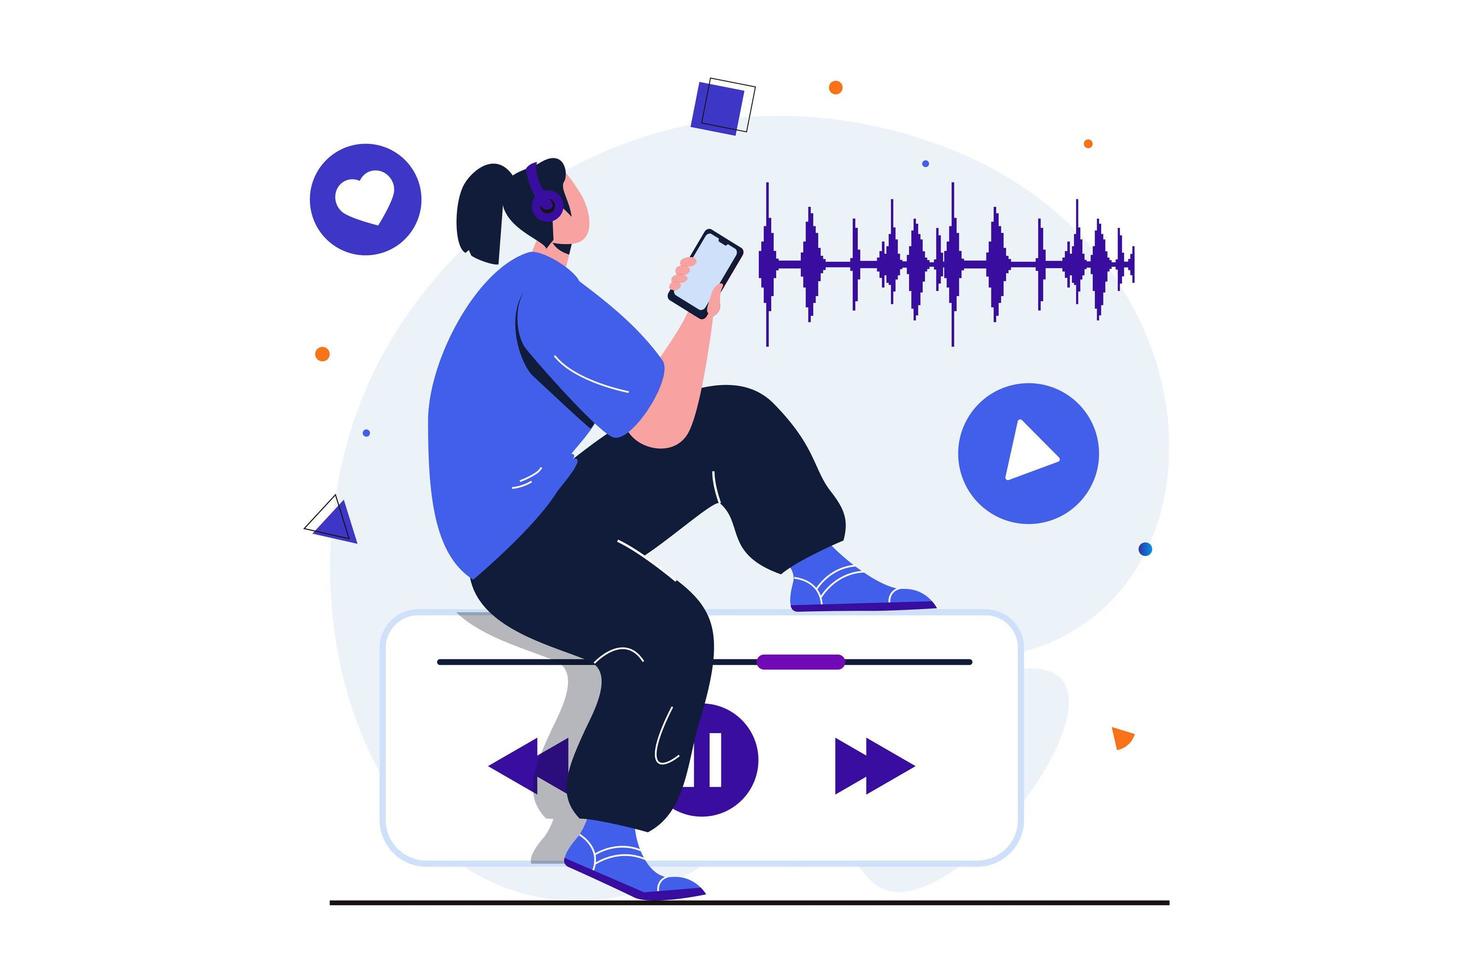 Podcast streaming modern flat concept for web banner design. Woman in headphones listens to live broadcast using mobile app. Listener enjoys music. Vector illustration with isolated people scene